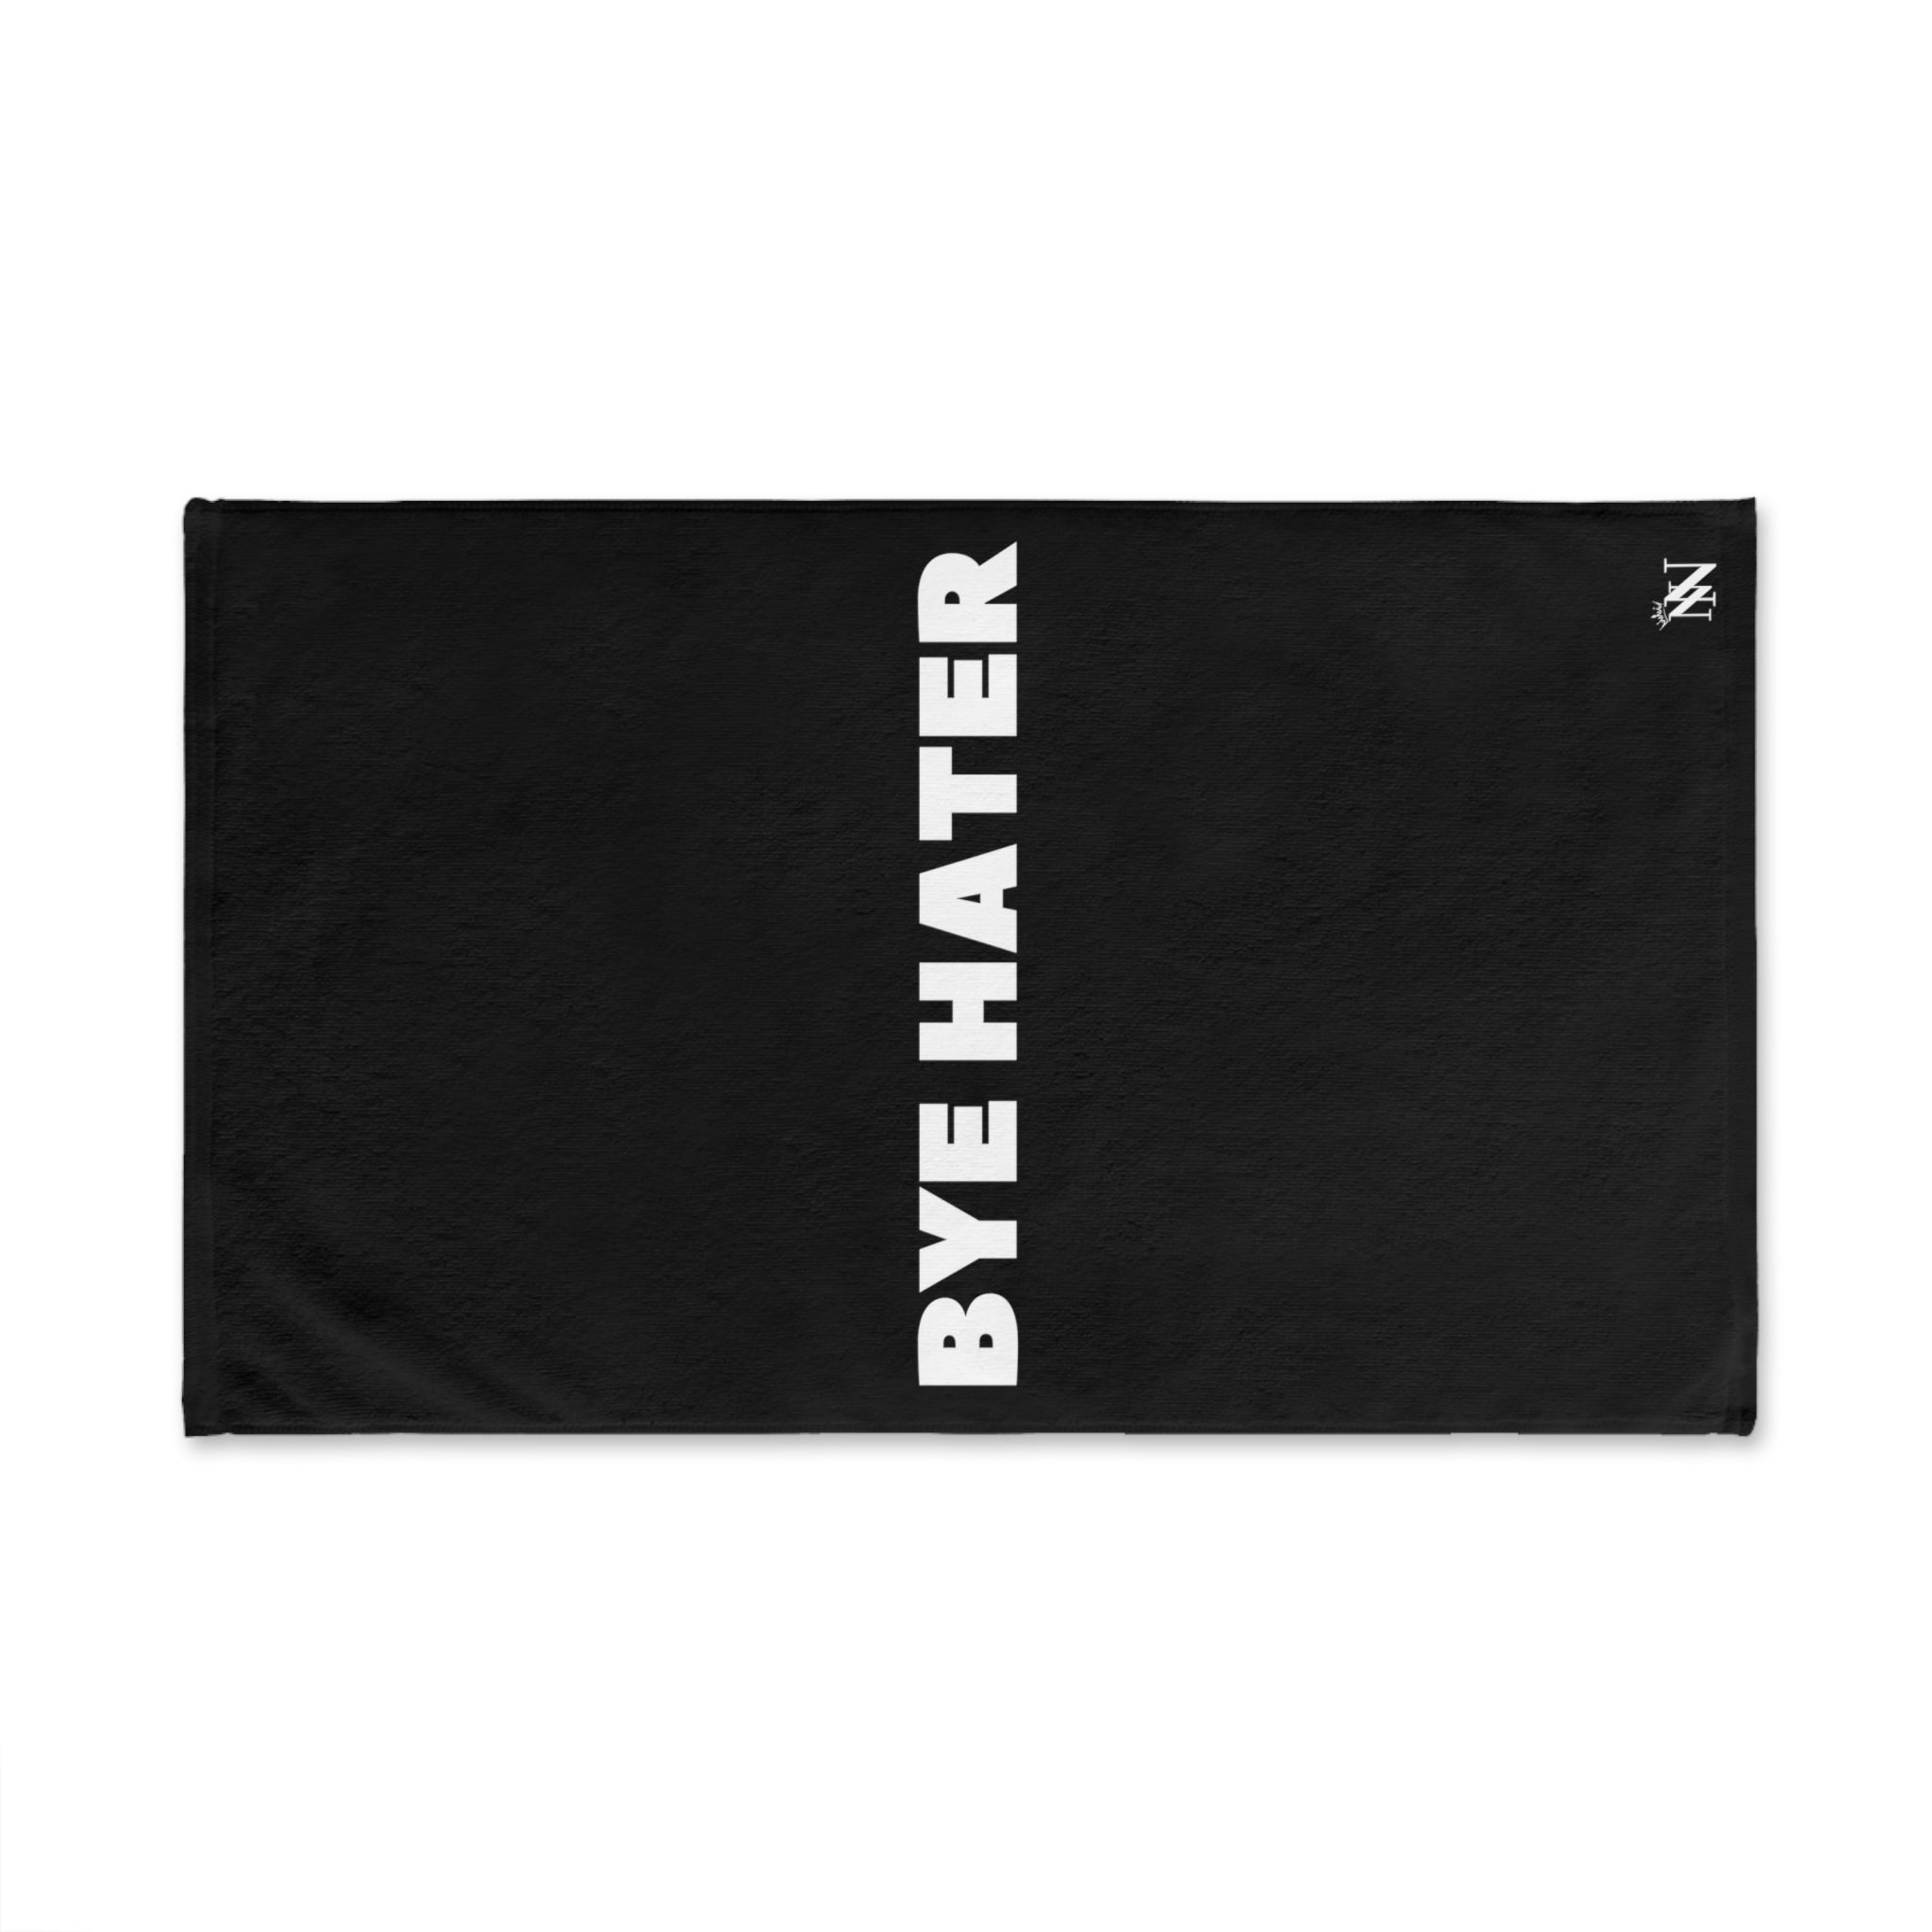 BYE Hater Fun Black | Sexy Gifts for Boyfriend, Funny Towel Romantic Gift for Wedding Couple Fiance First Year 2nd Anniversary Valentines, Party Gag Gifts, Joke Humor Cloth for Husband Men BF NECTAR NAPKINS